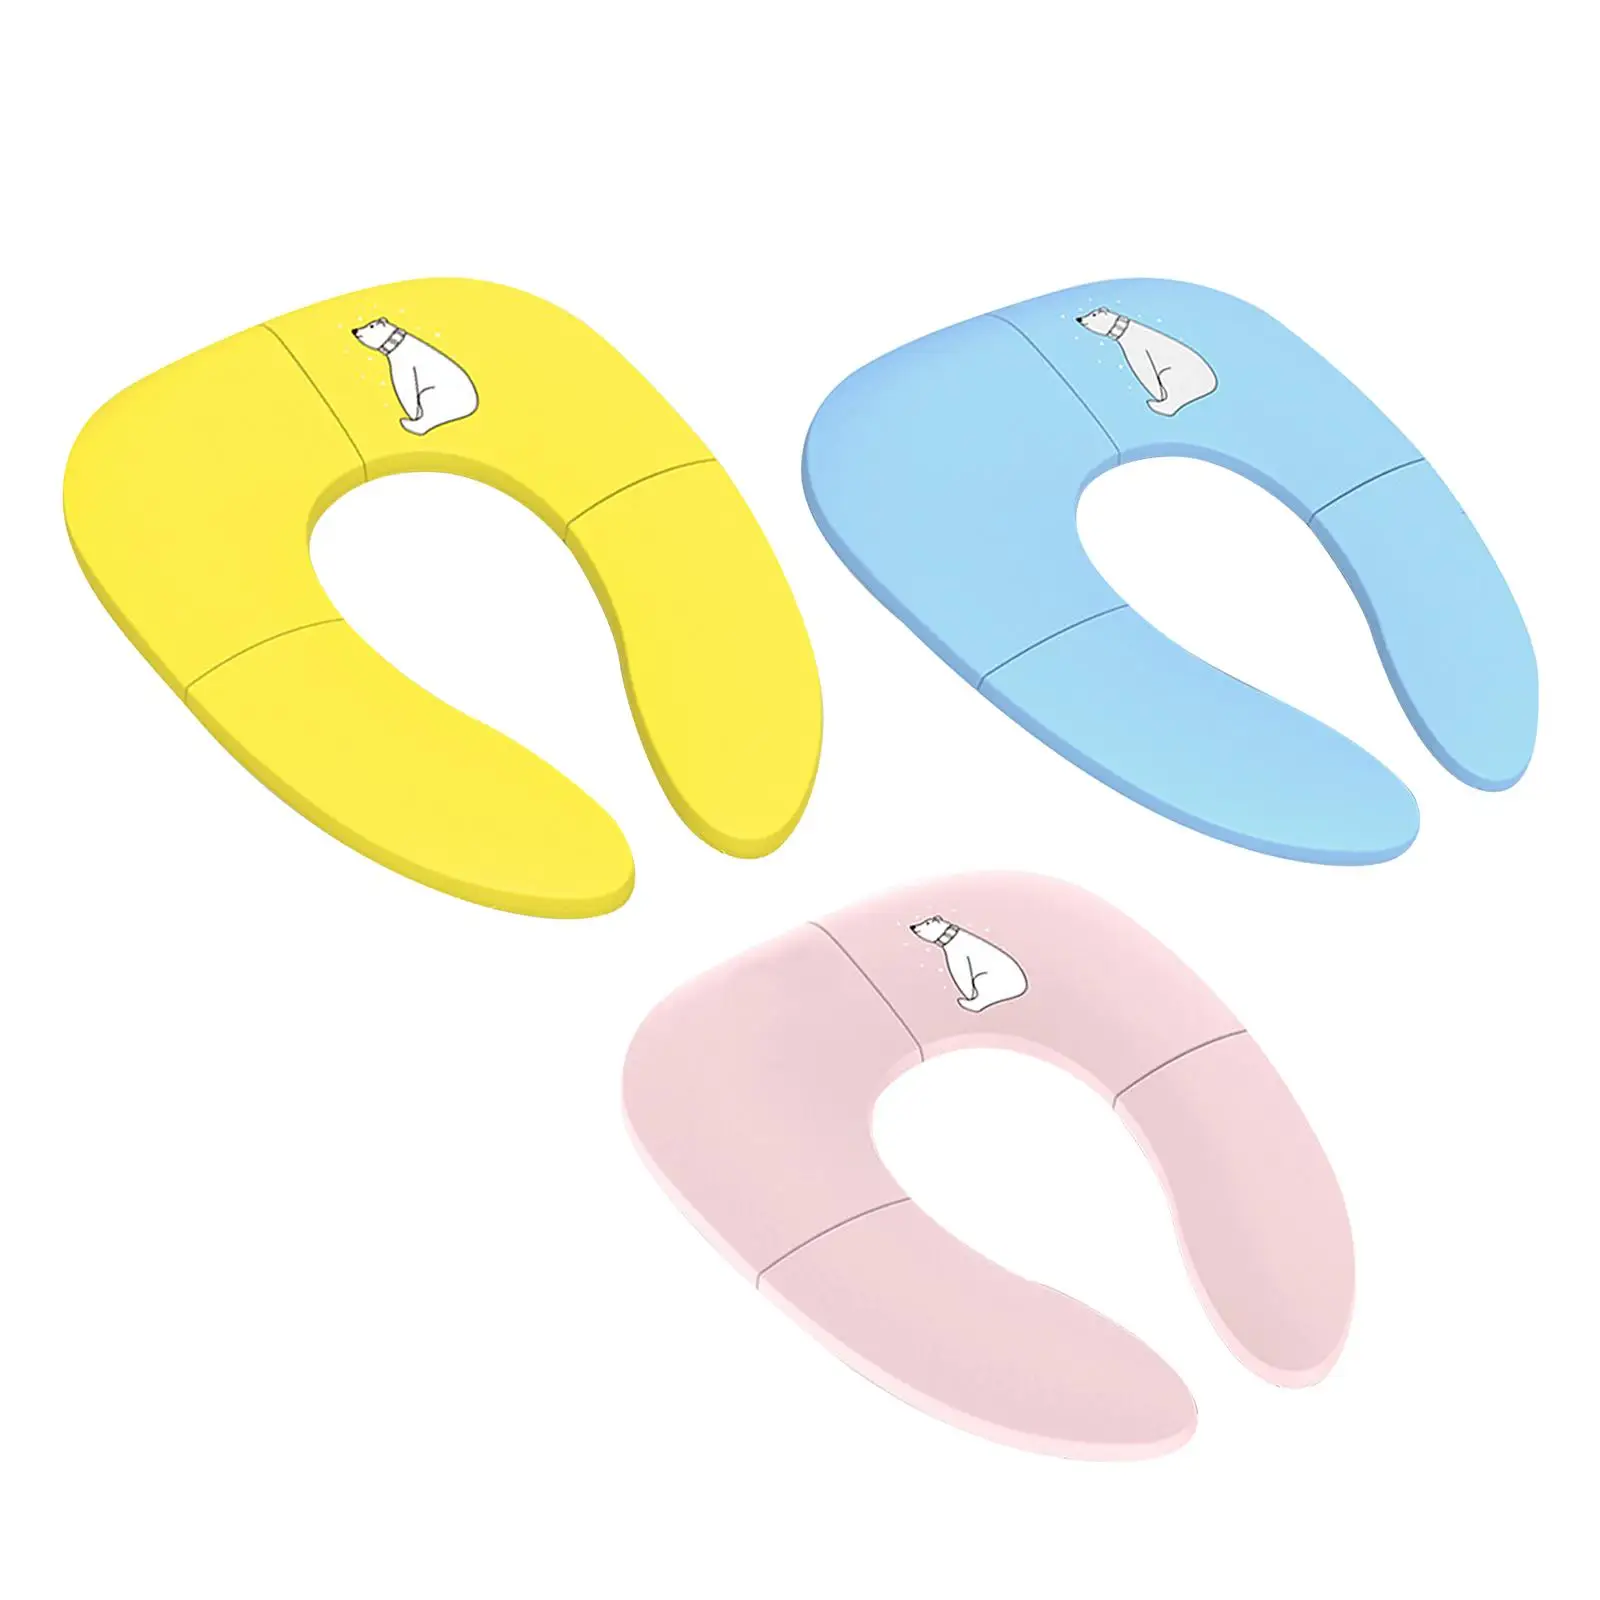 Foldable Toilet Seat Portable Upgraded Toilet Cover for Home Use girls Kids